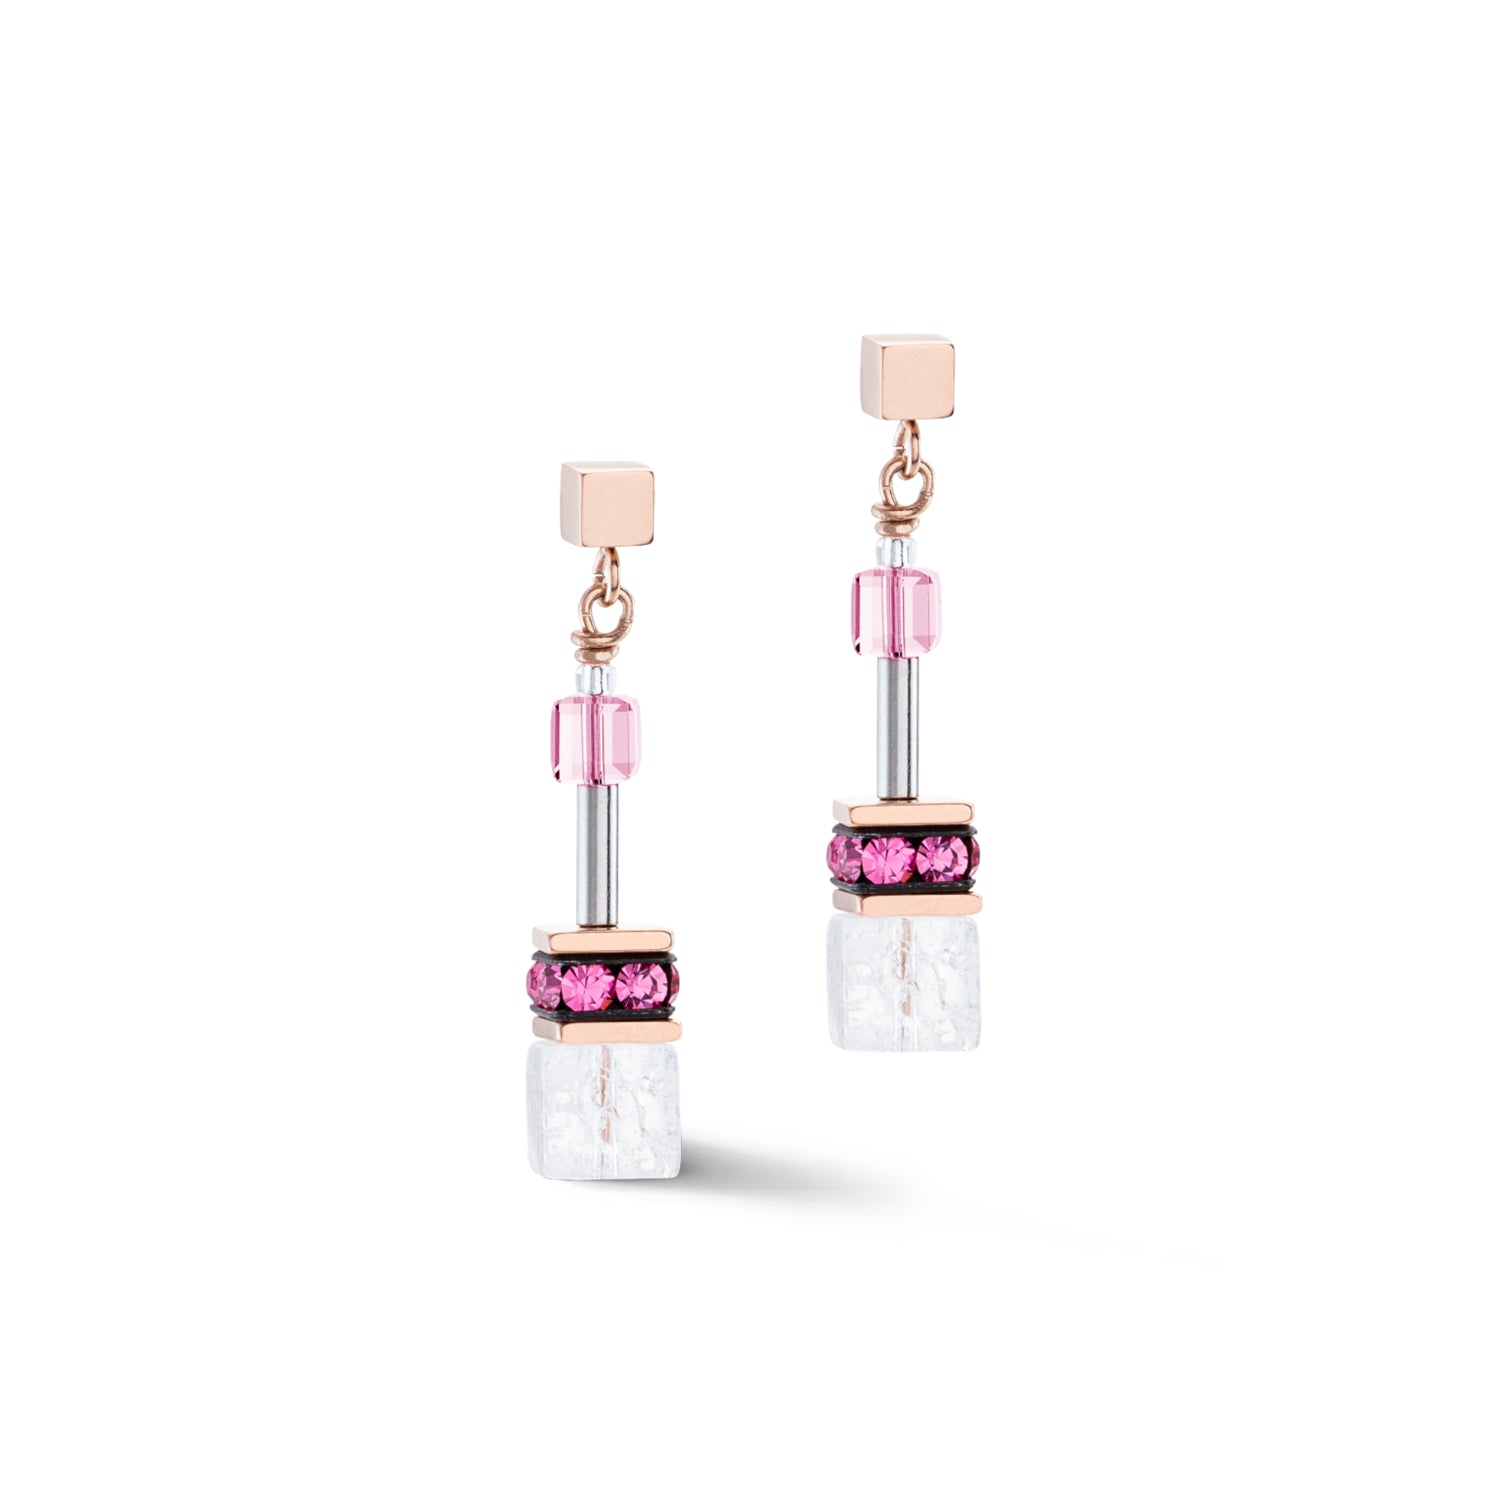 Coeur de Lion Iconic Nature Earrings in Pink/White 3018/21-0400